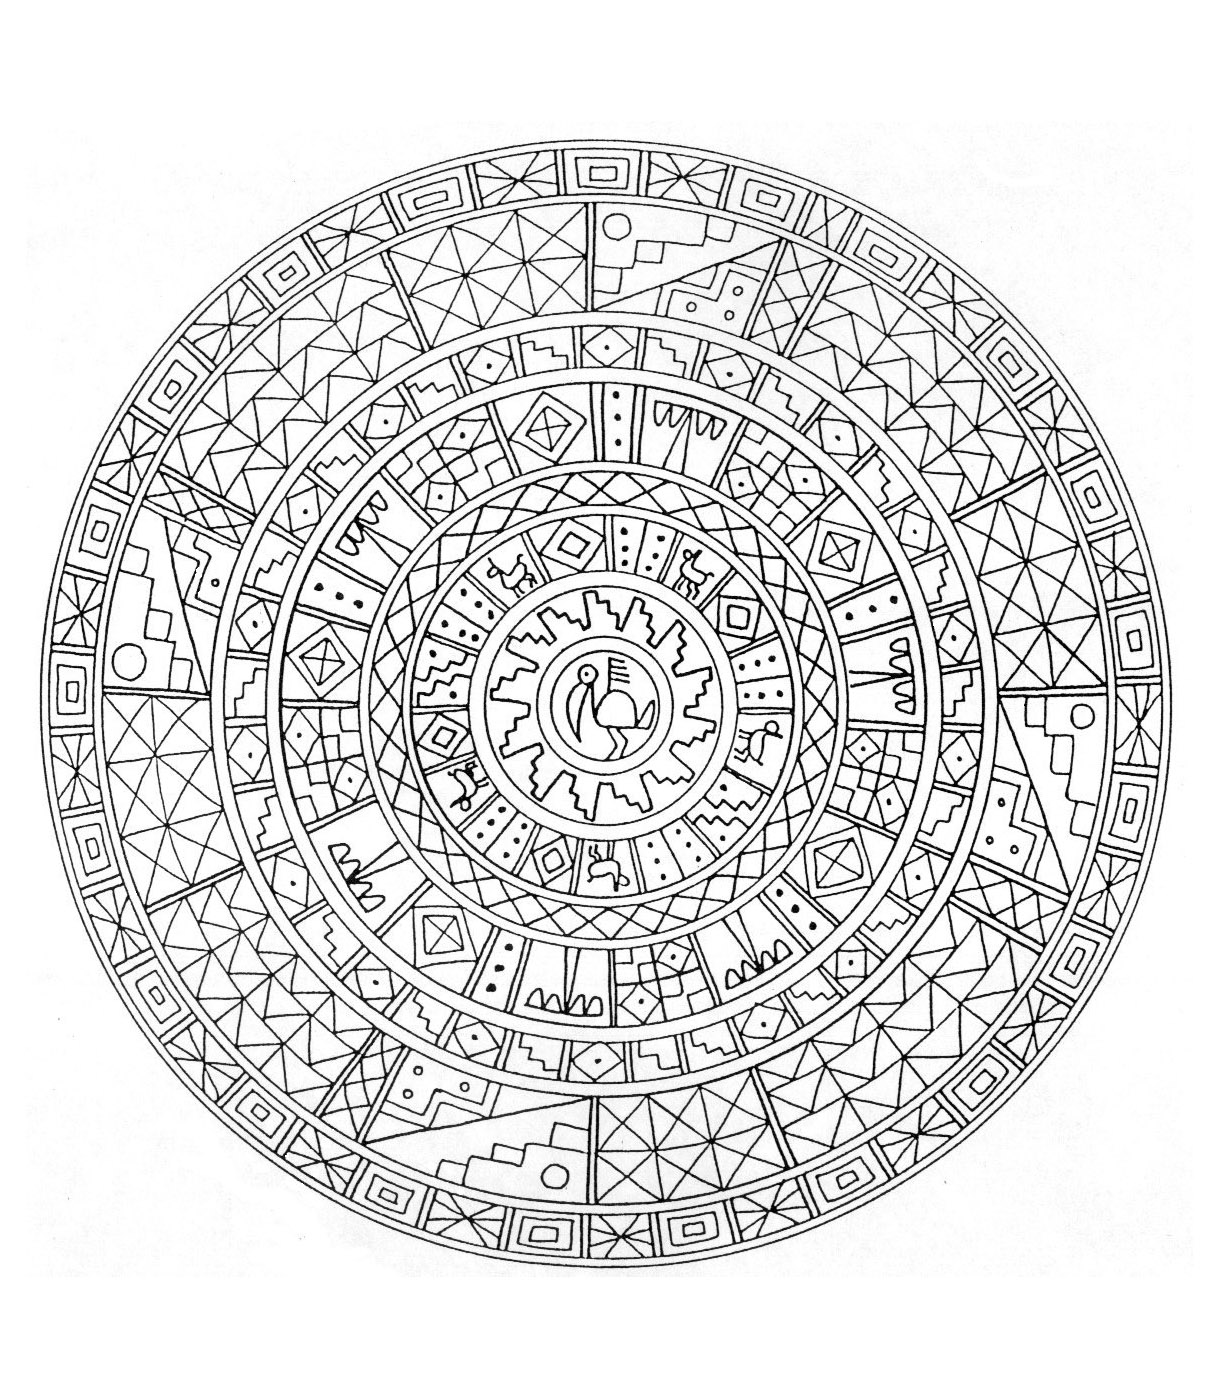 Mandala template that seems to be inspired by Aztecs or Mayans